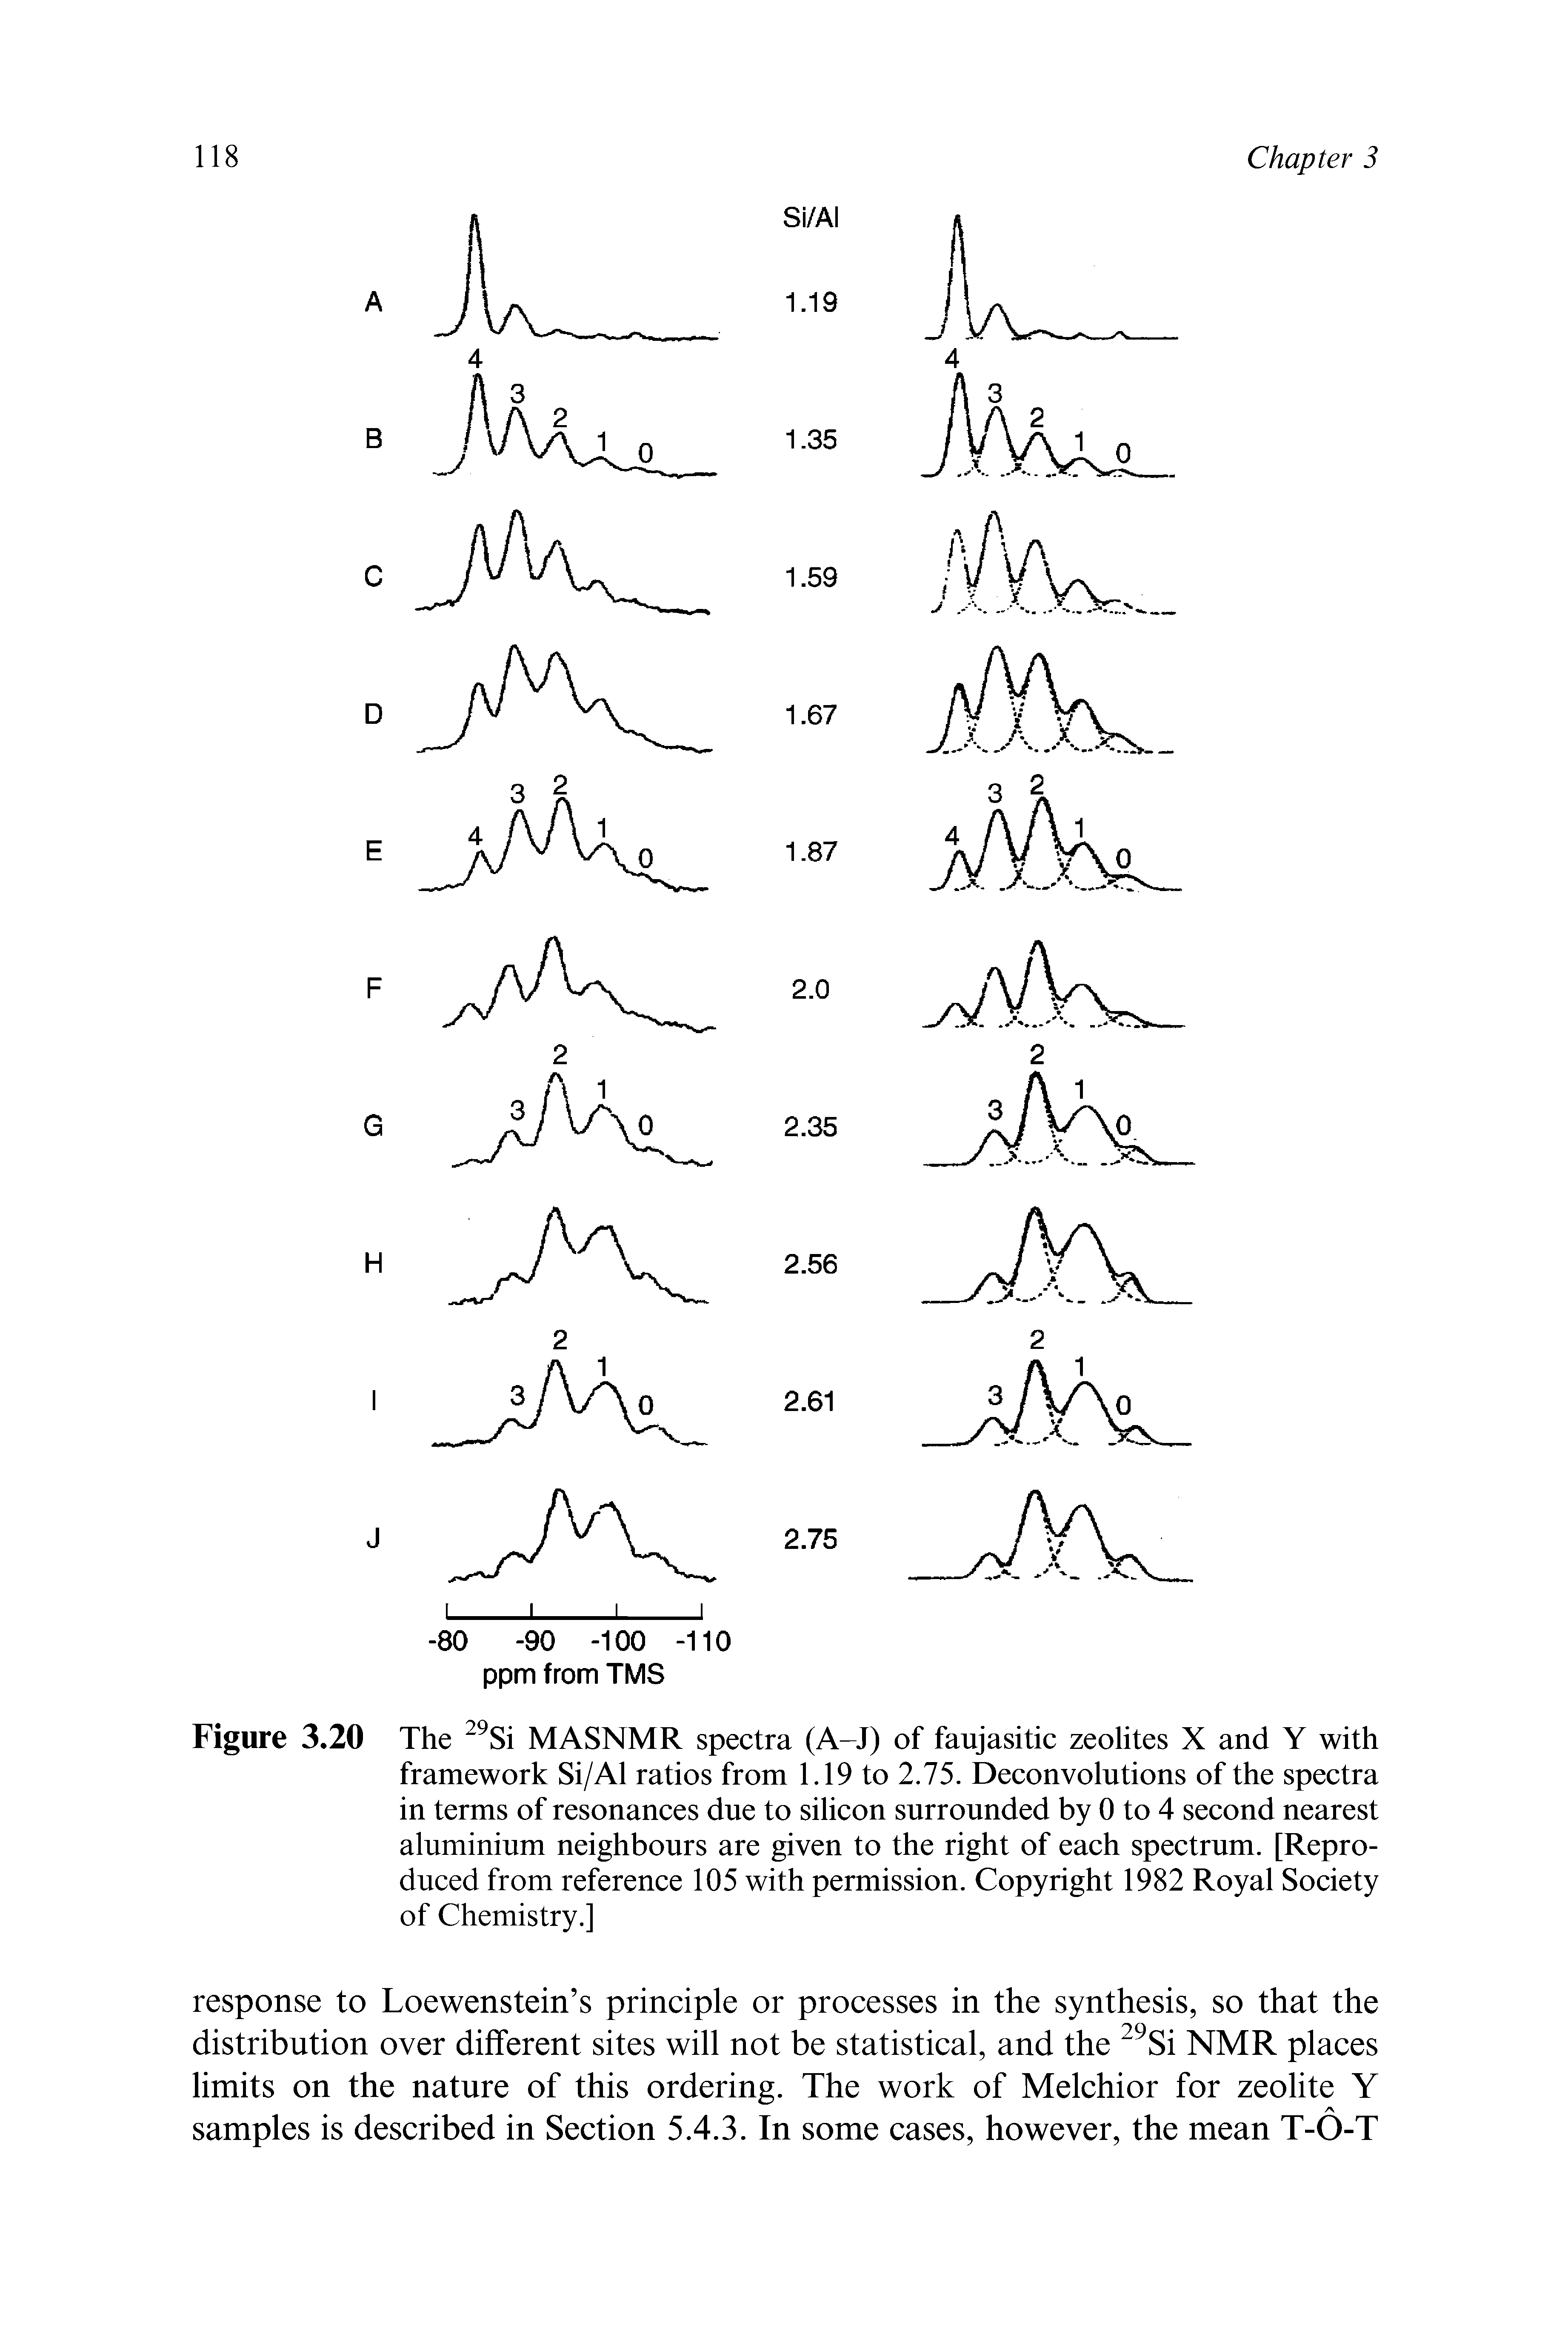 Figure 3.20 The MASNMR spectra (A-J) of faujasitic zeolites X and Y with framework Si/Al ratios from 1.19 to 2.75. Deconvolutions of the spectra in terms of resonances due to silicon surrounded by 0 to 4 second nearest aluminium neighbours are given to the right of each spectrum. [Reproduced from reference 105 with permission. Copyright 1982 Royal Society of Chemistry.]...